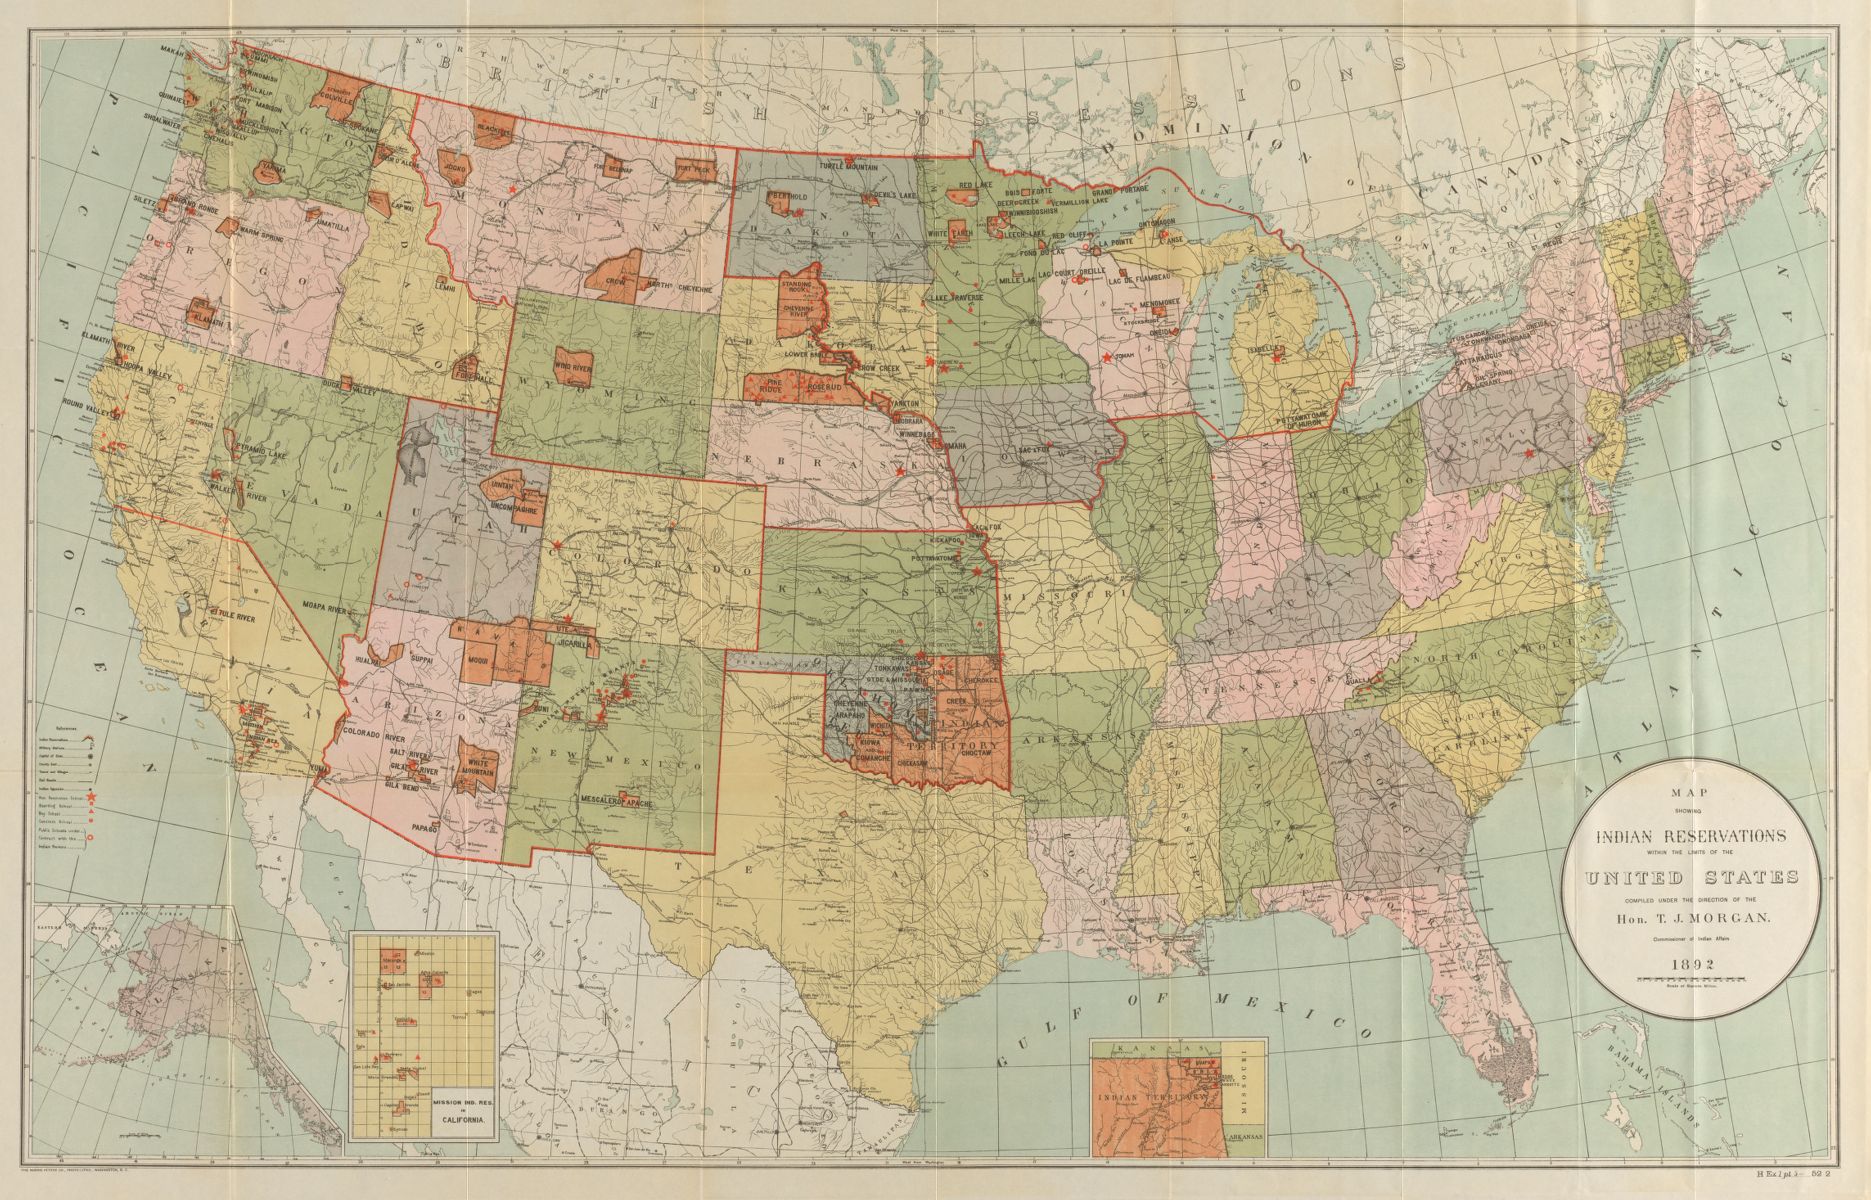 This map in our digital collections depicts Indian Reservations in the United States as they existed in the 1890s.